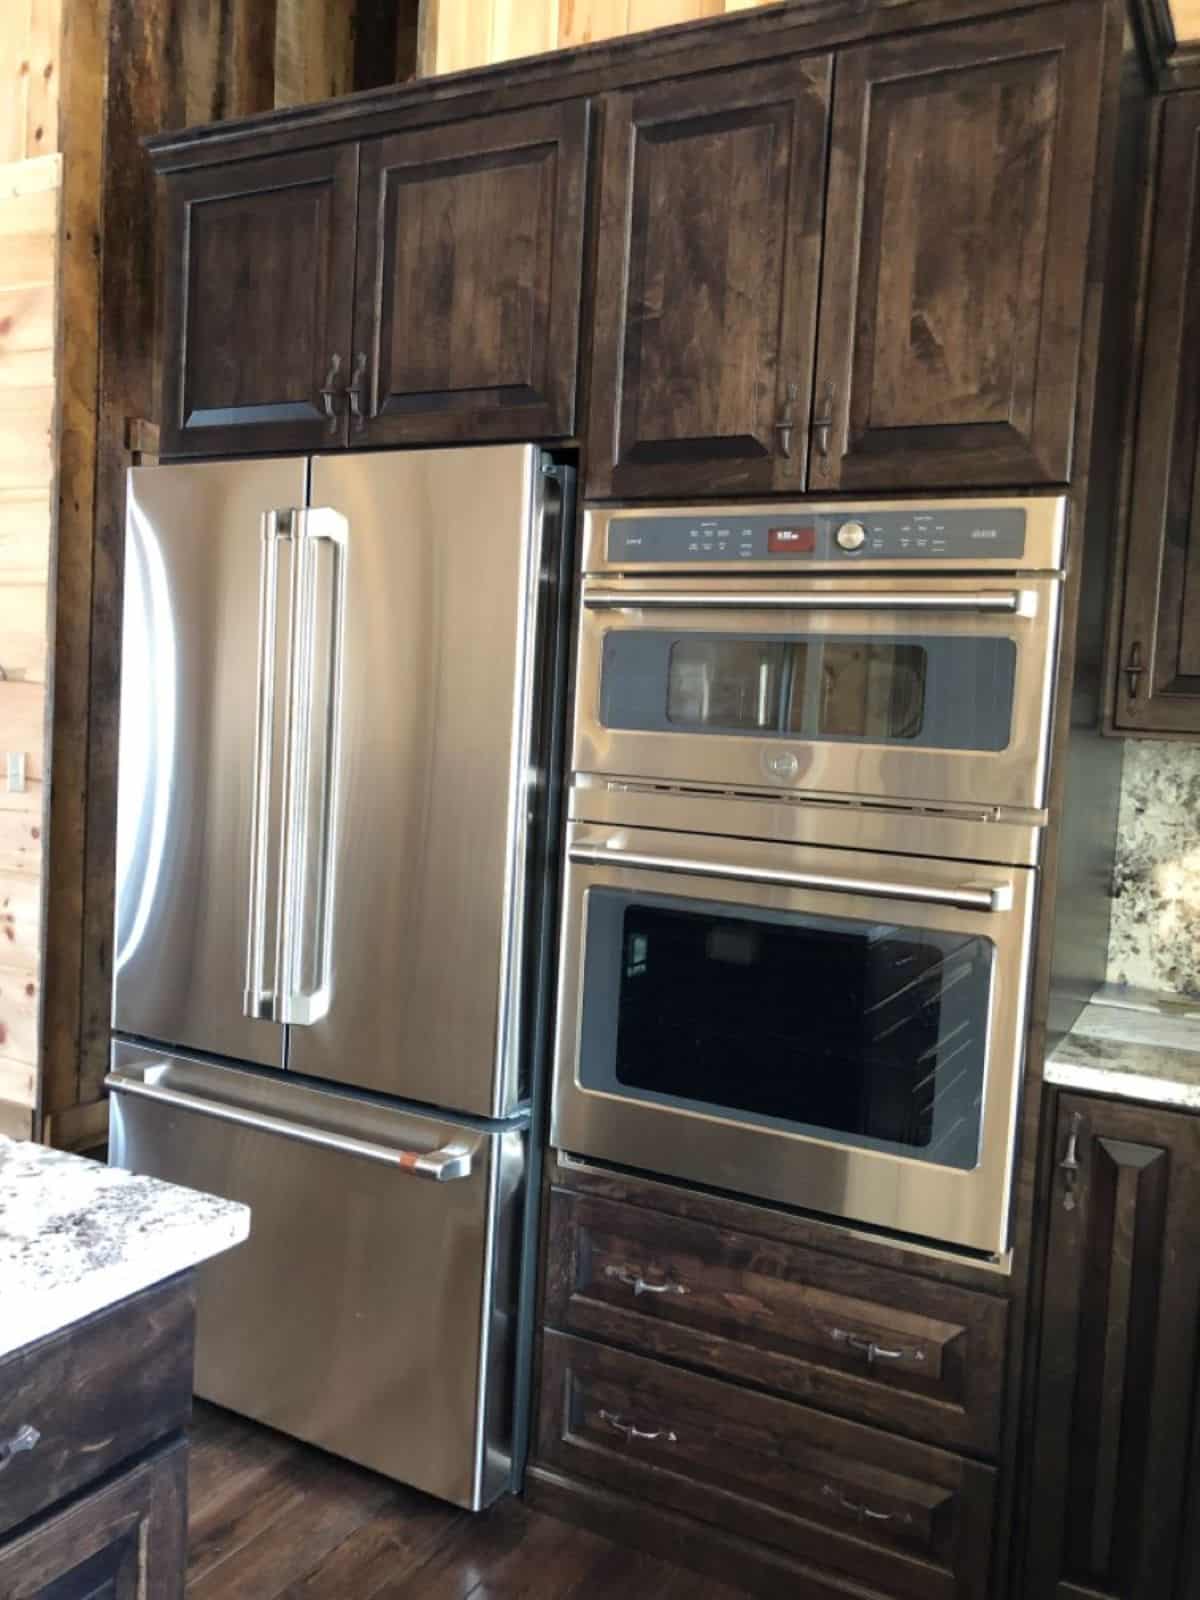 stainless steel appliances against wall with wood cabinets